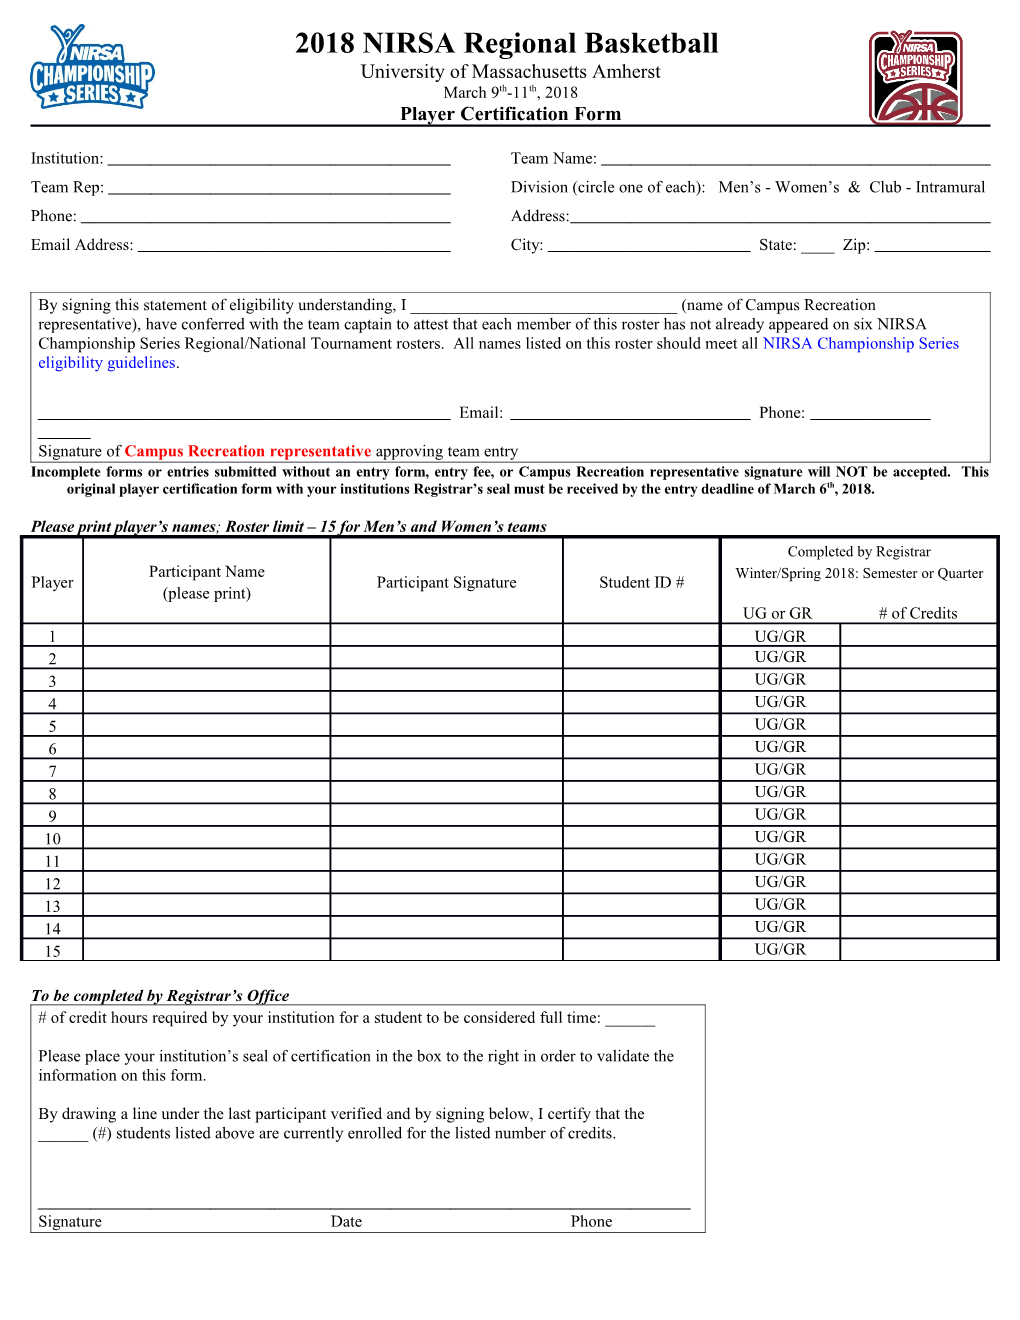 Player Certification Form